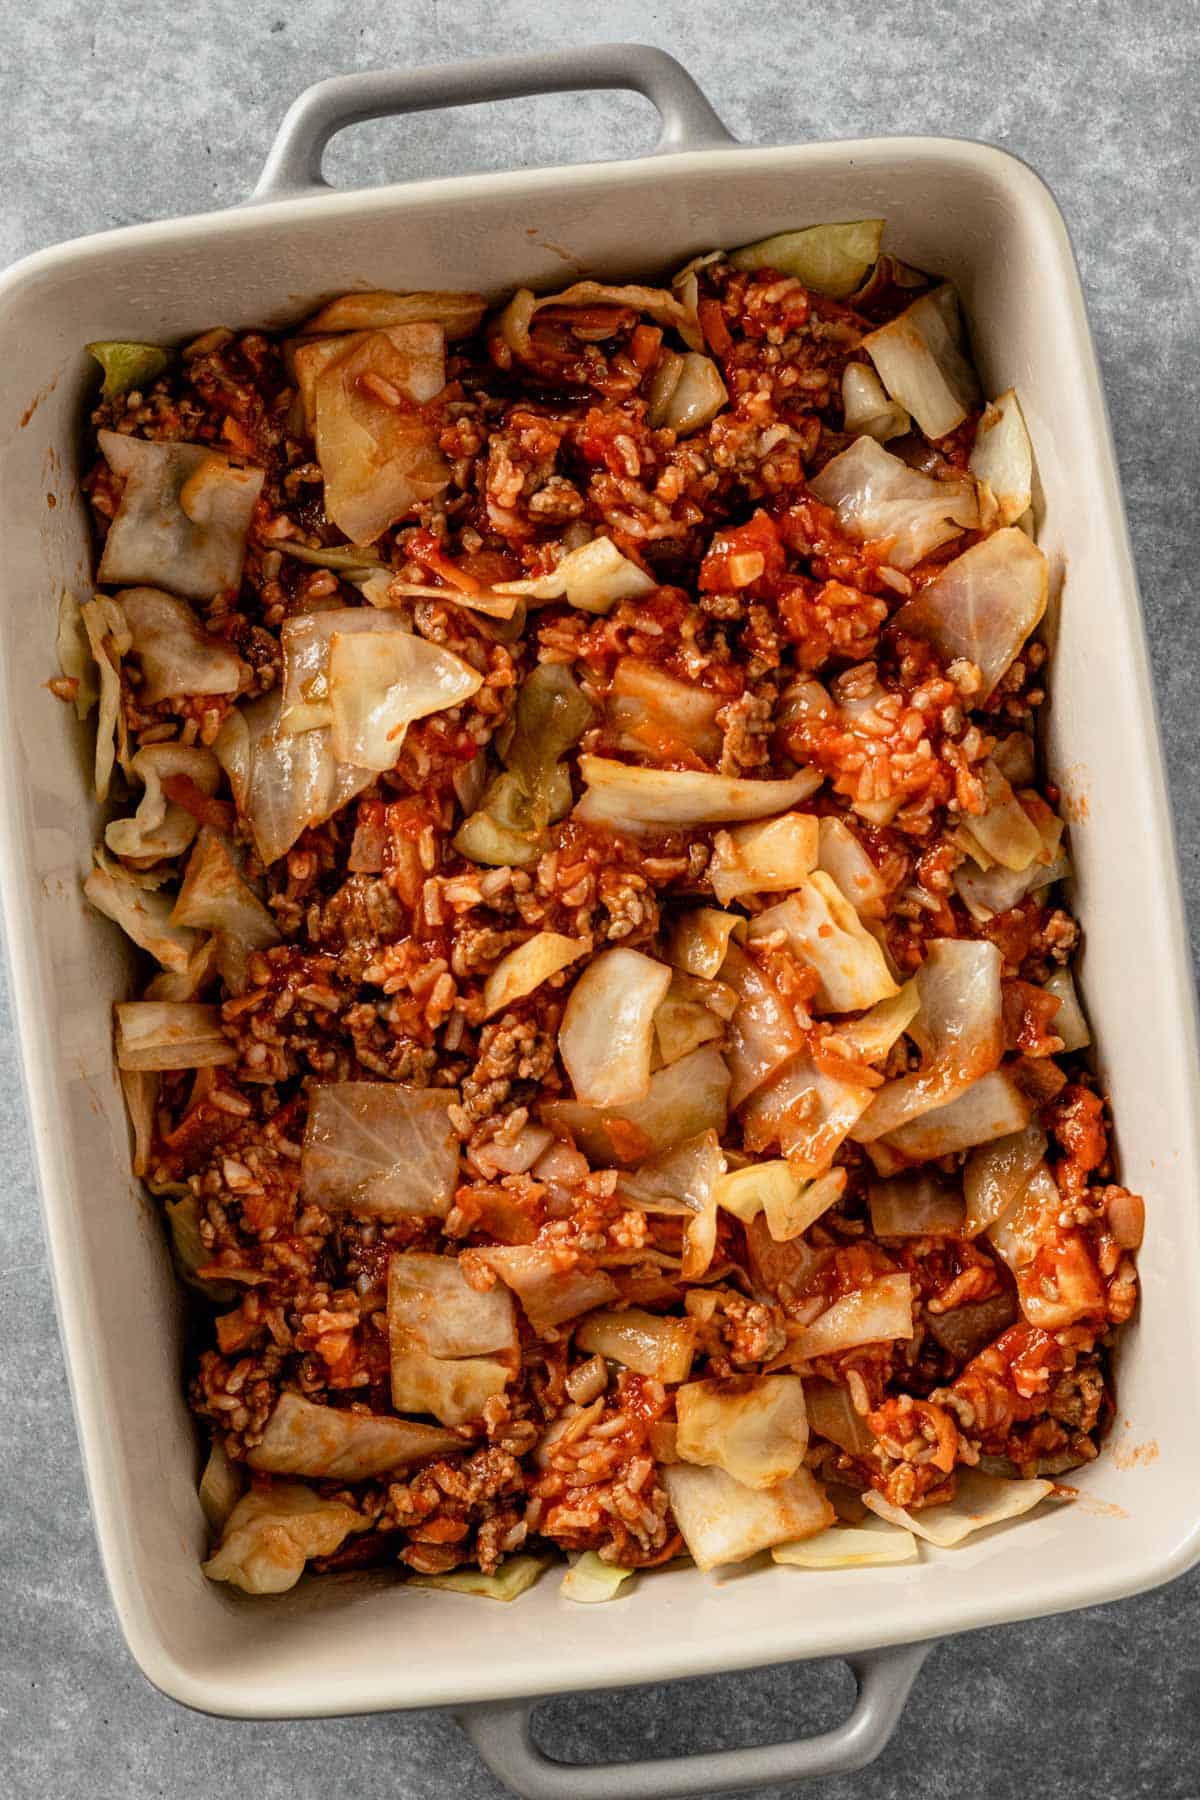 layers of ground beef and cabbage mixture in casserole dish